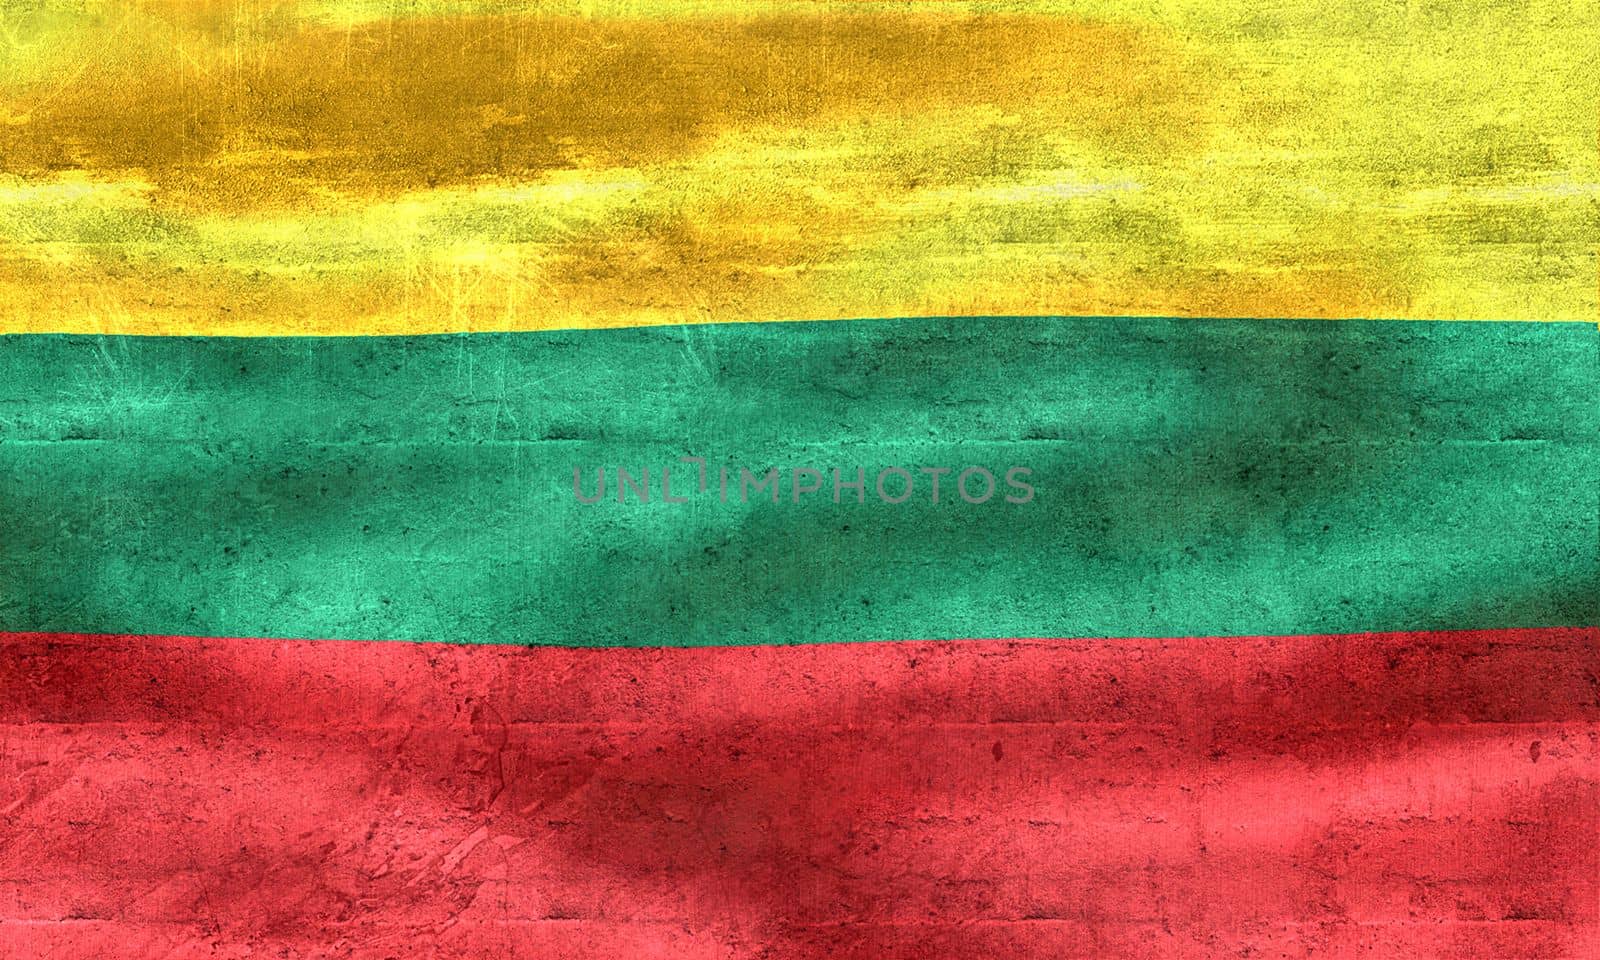 3D-Illustration of a Lithuania flag - realistic waving fabric flag by MP_foto71